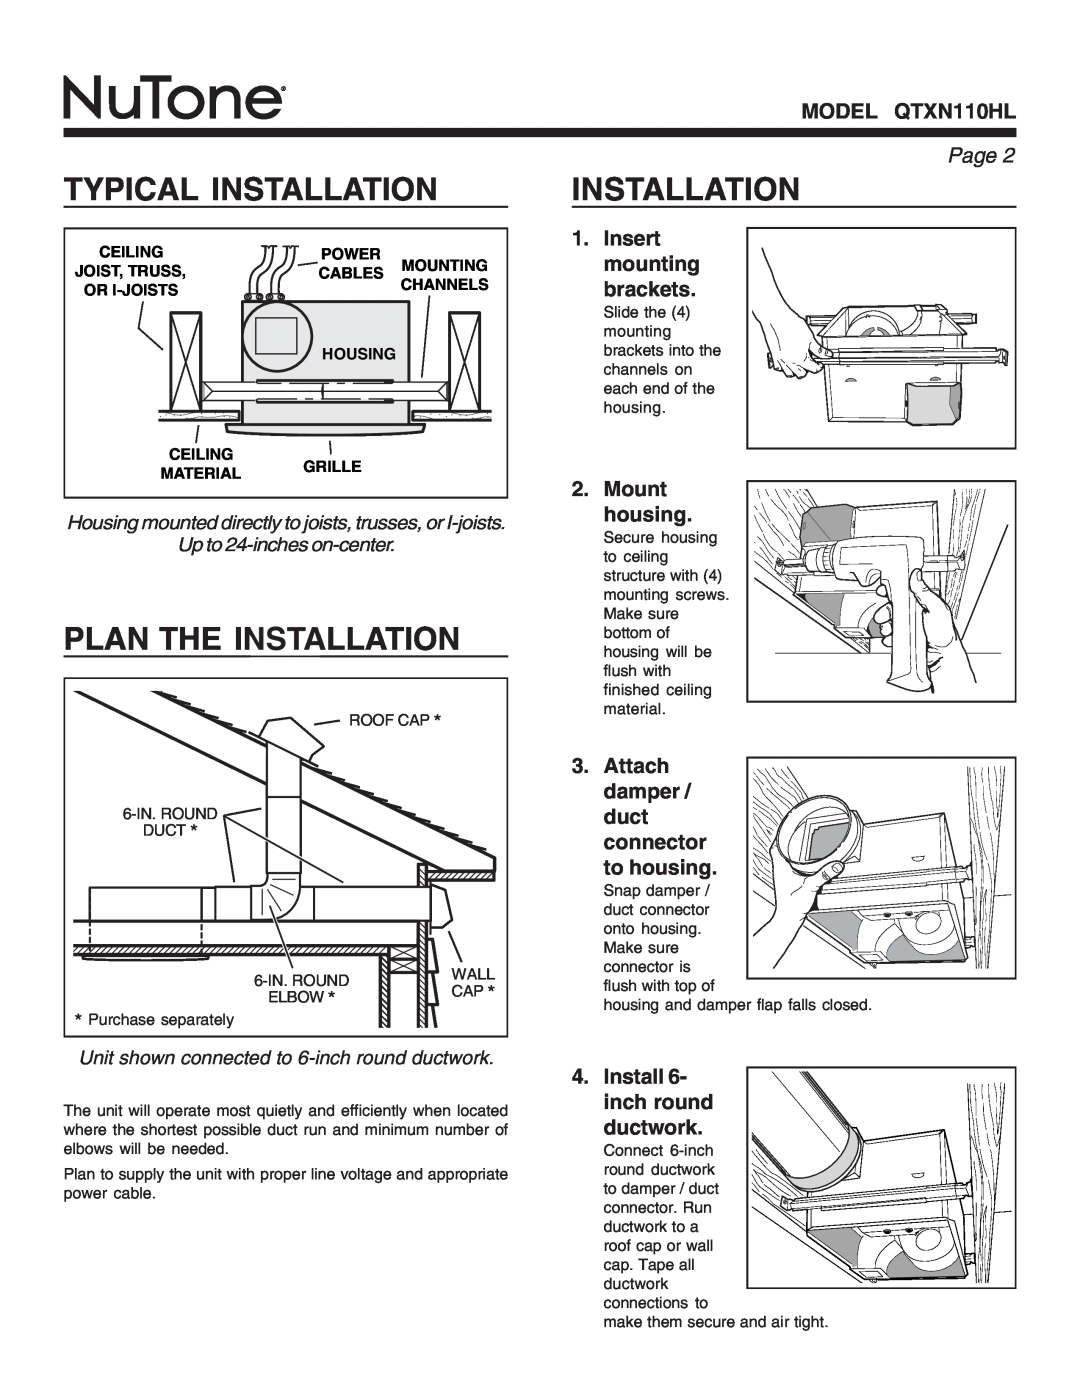 NuTone Typical Installation, Plan The Installation, Insert mounting brackets, Mount housing, MODEL QTXN110HL, Page 